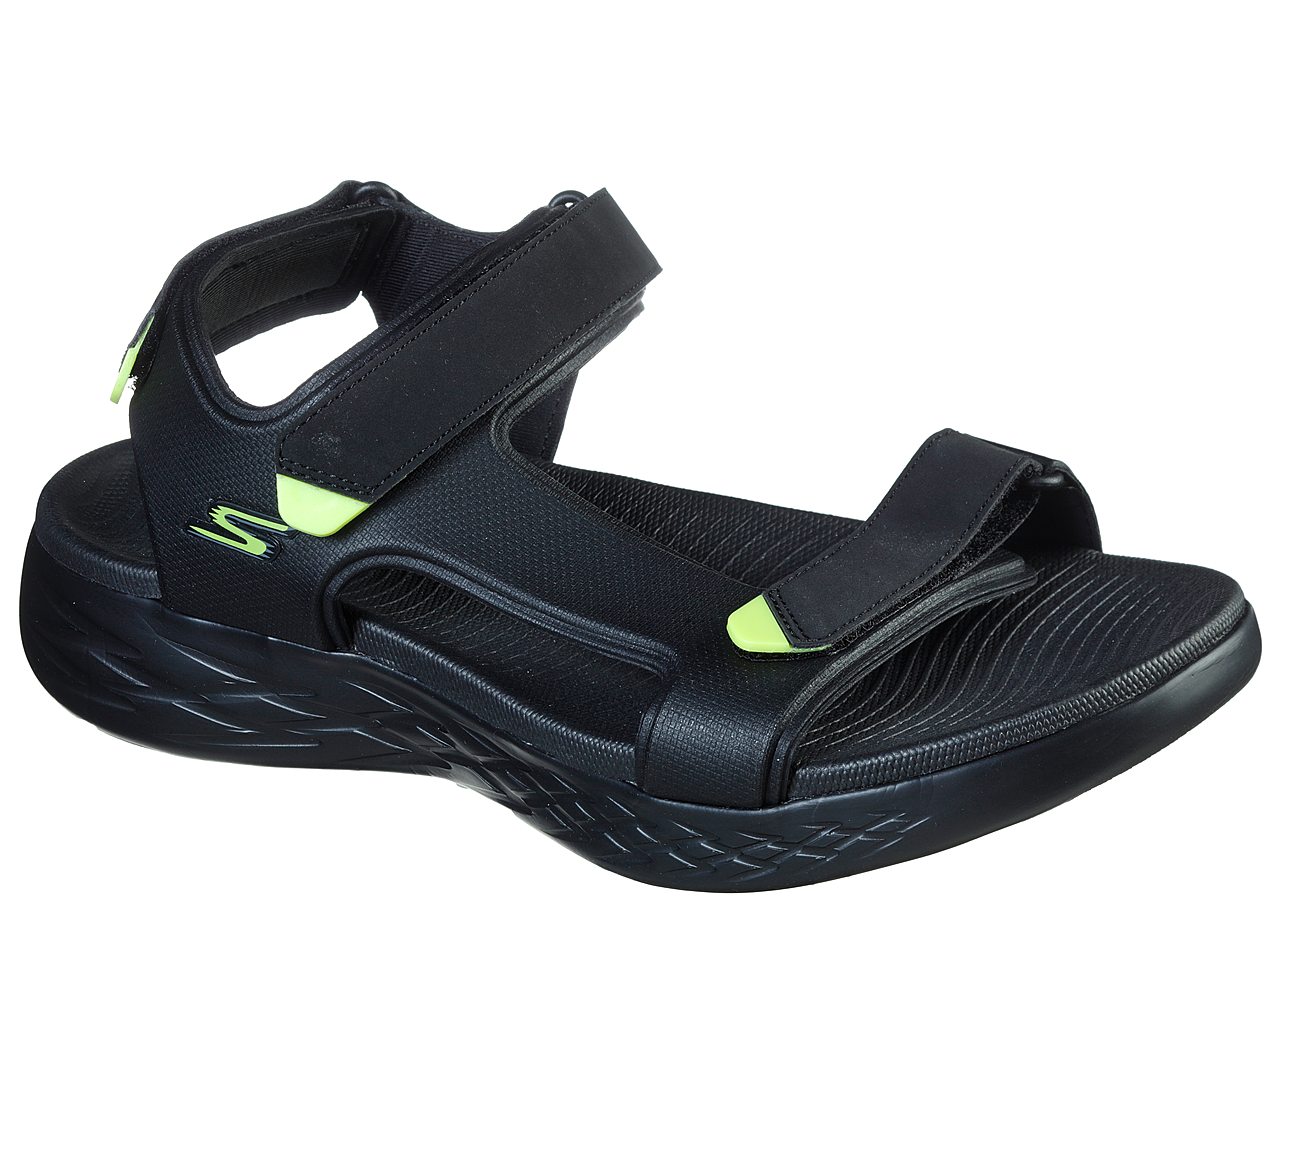 ON-THE-GO 600 - VENTURE, BLACK/LIME Footwear Lateral View